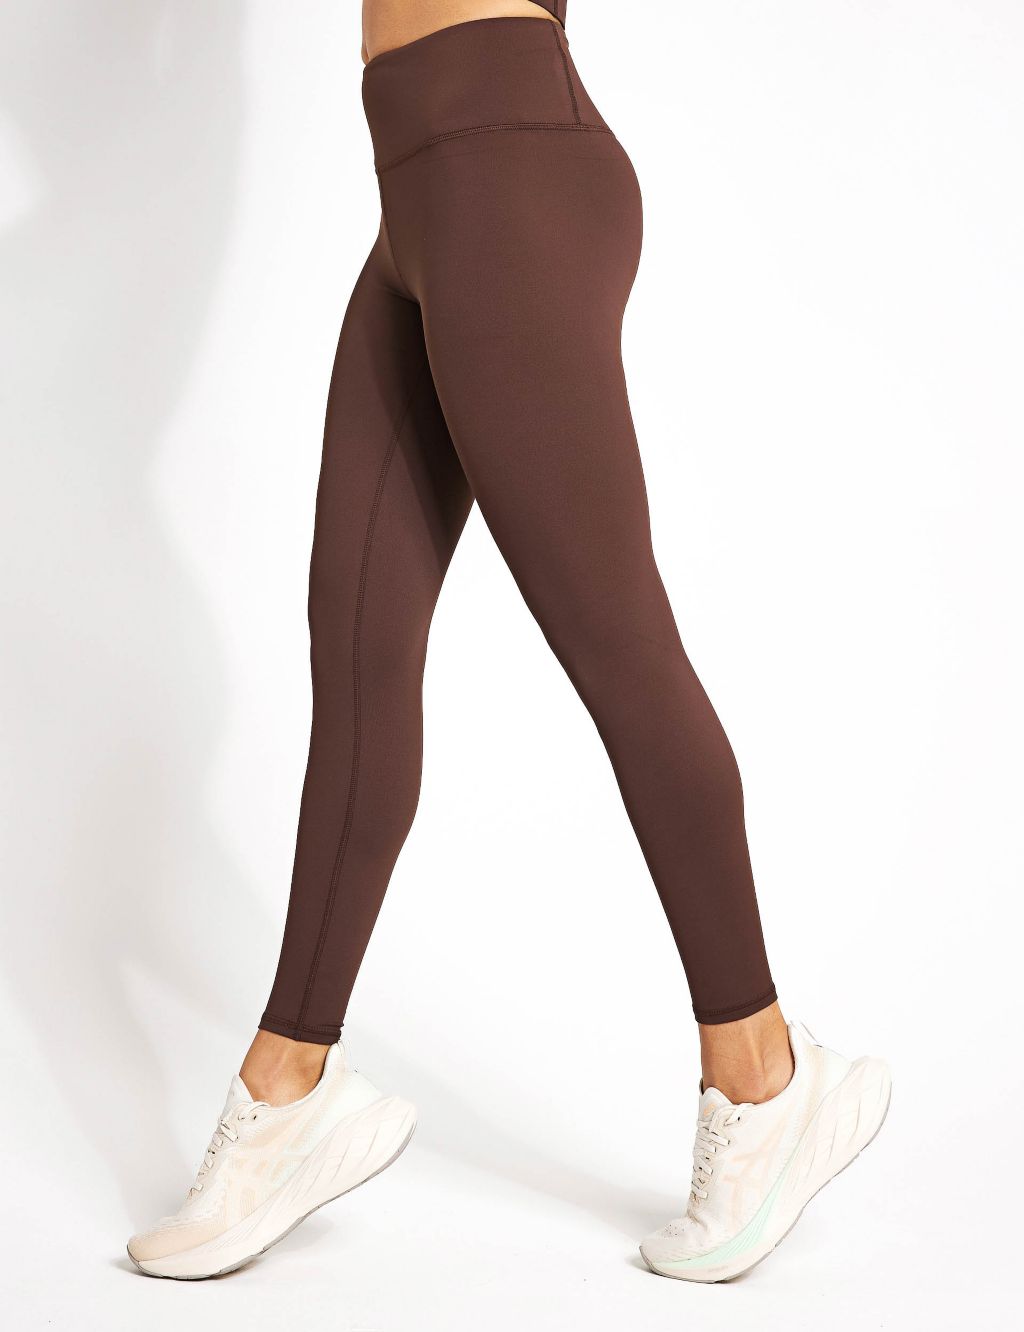 Clearance! Easter Gifts, High Waisted Leggings for Women, High